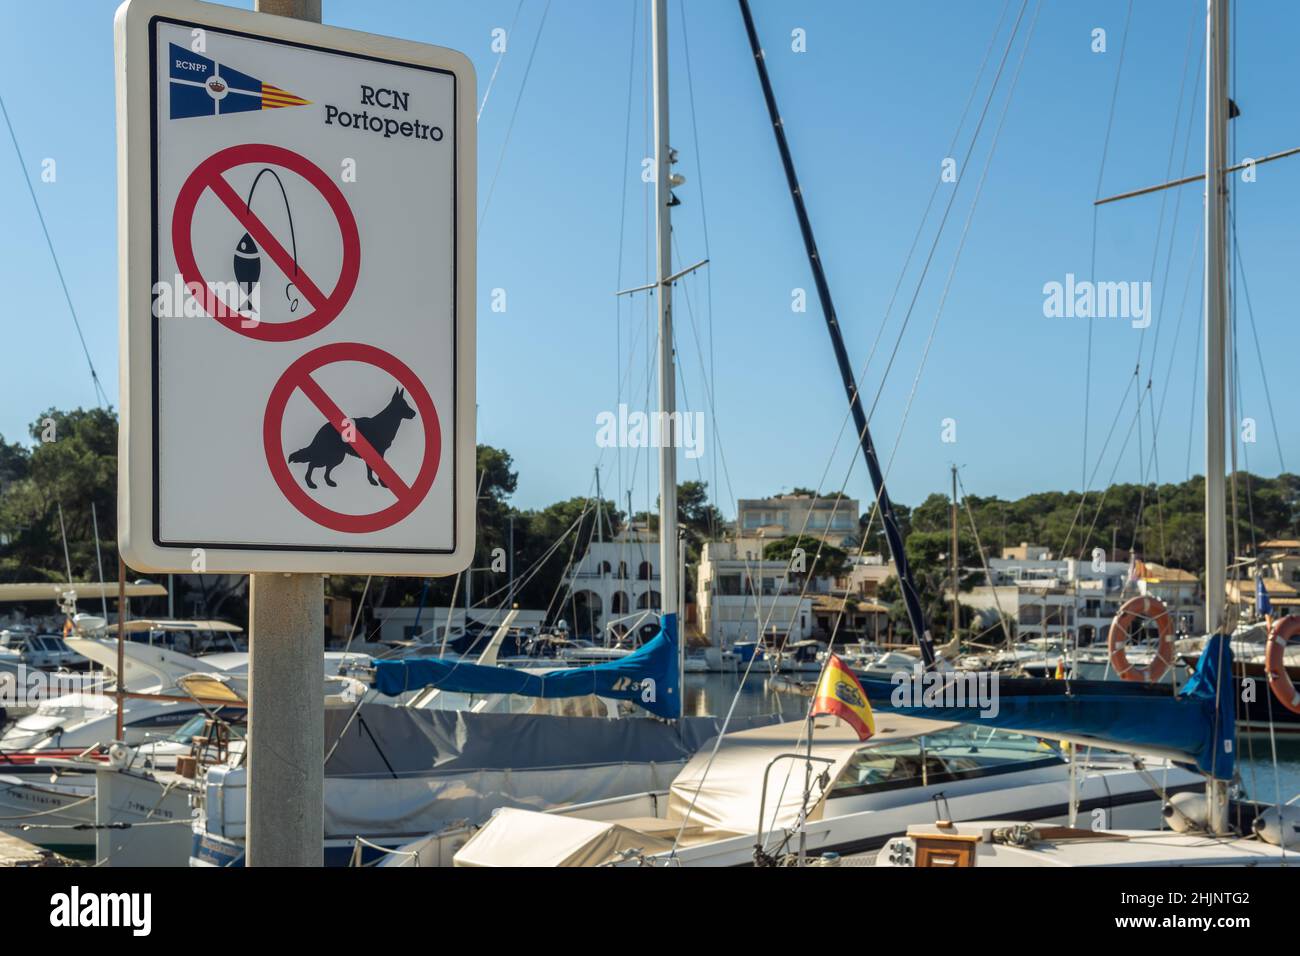 Portopetro, Spain; january 27 2022: Close-up of a sign at the Portopetro yacht club, with a sign prohibiting fishing and loose animals Stock Photo